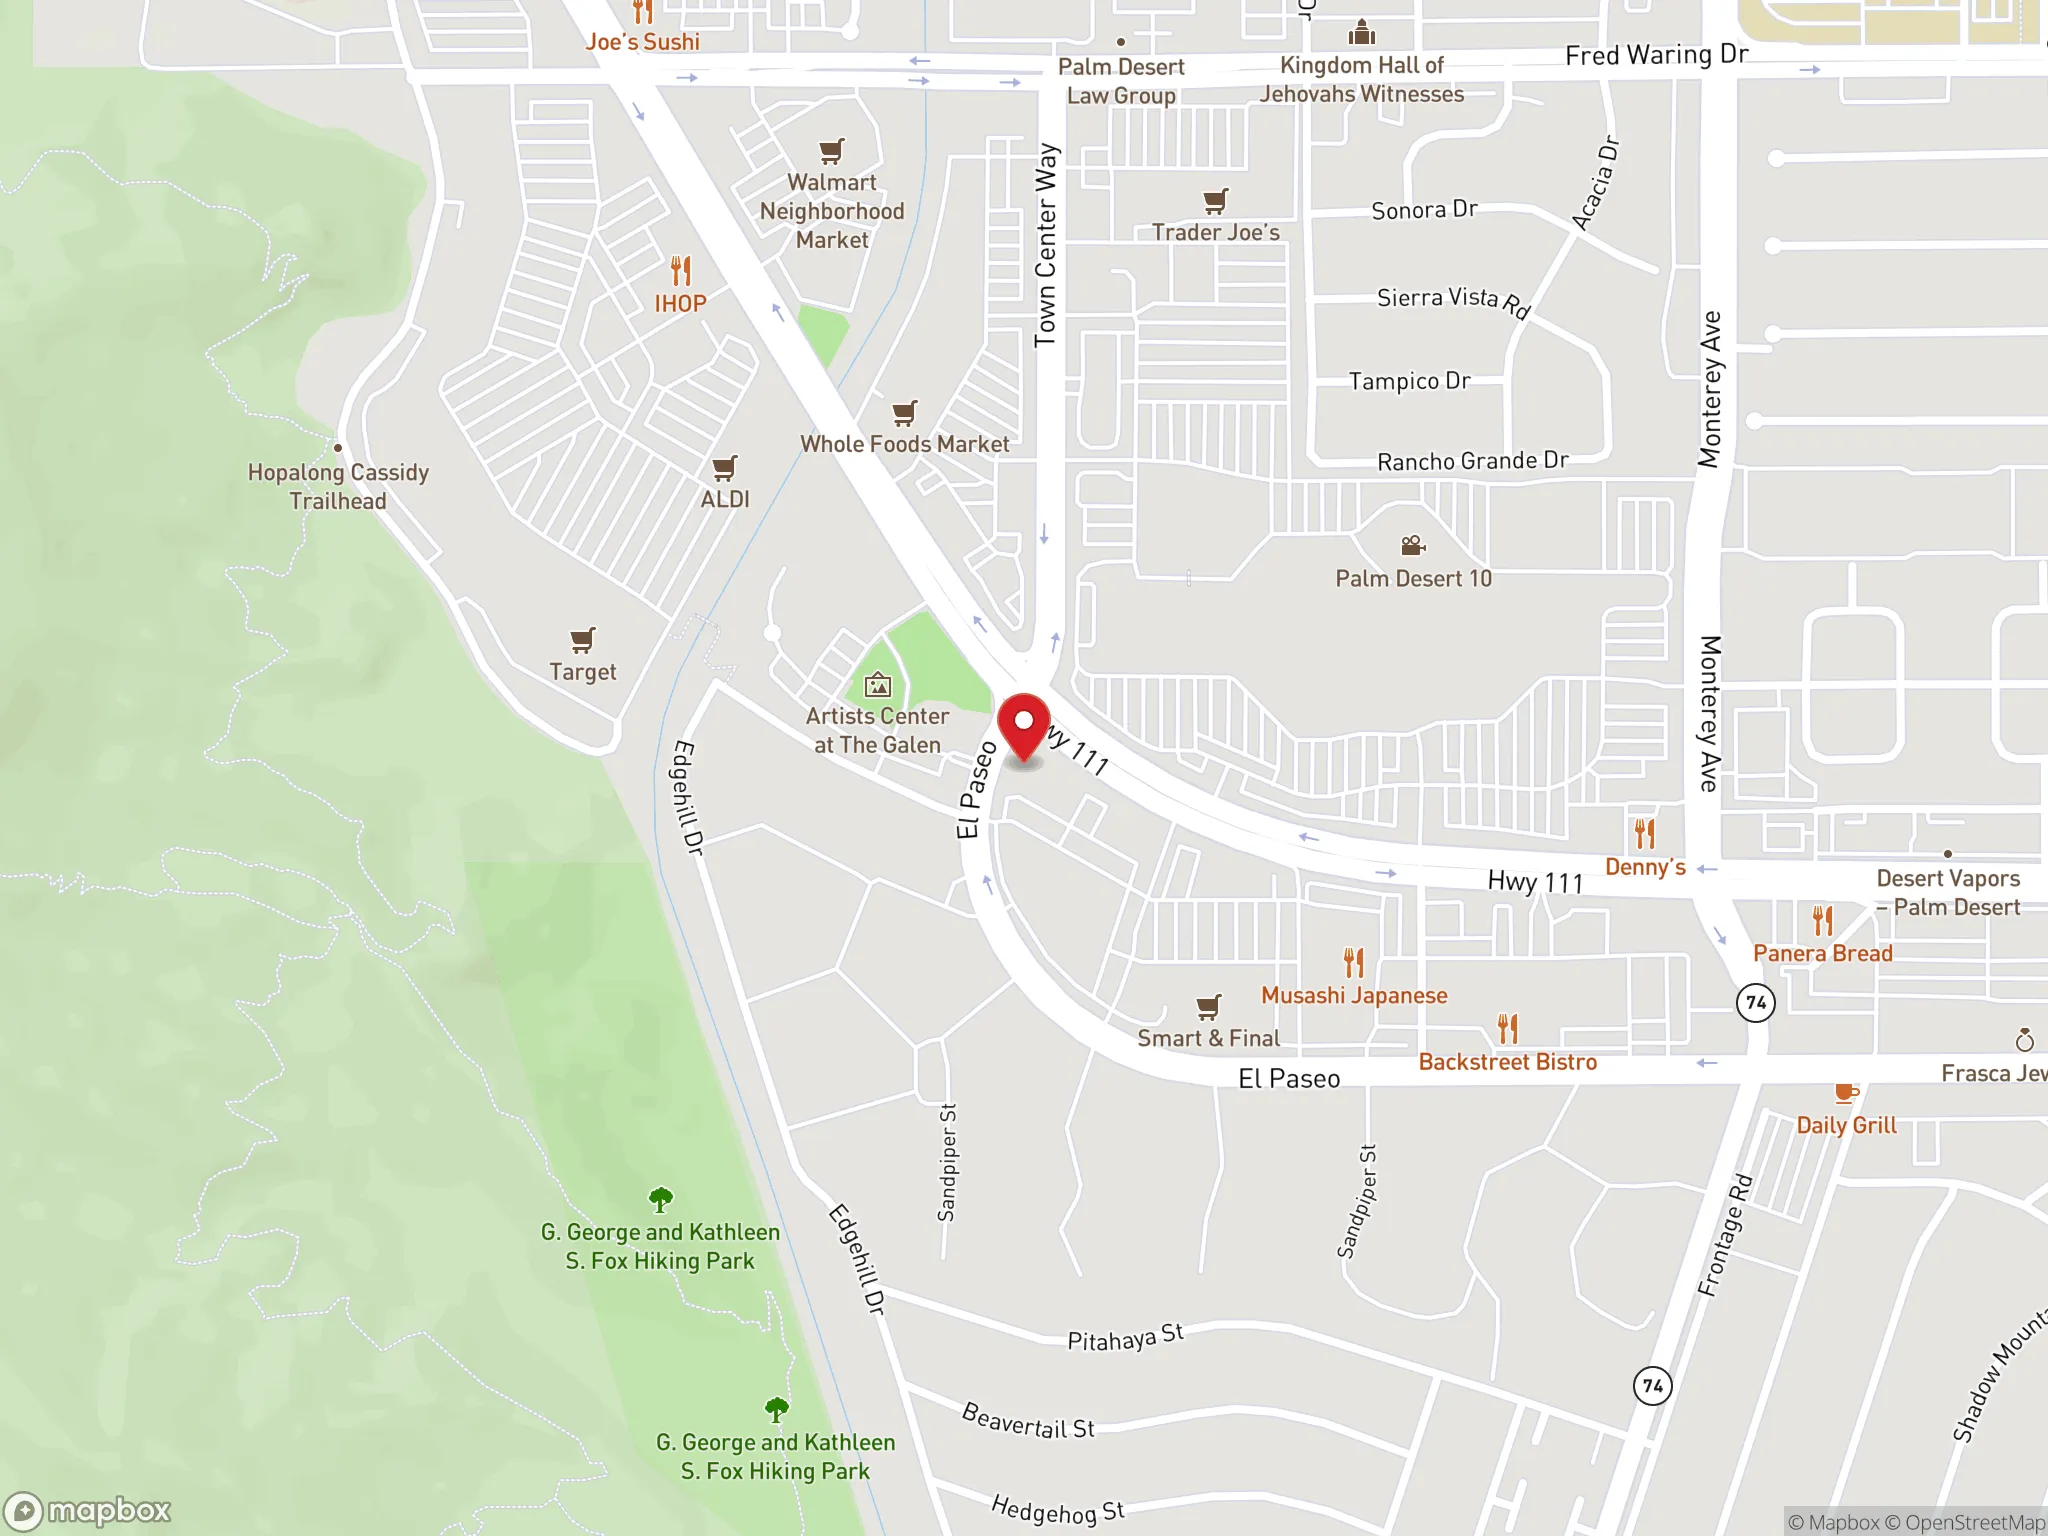 Map showing the location of a Dave's Hot Chicken restaurant in Palm Desert, California.